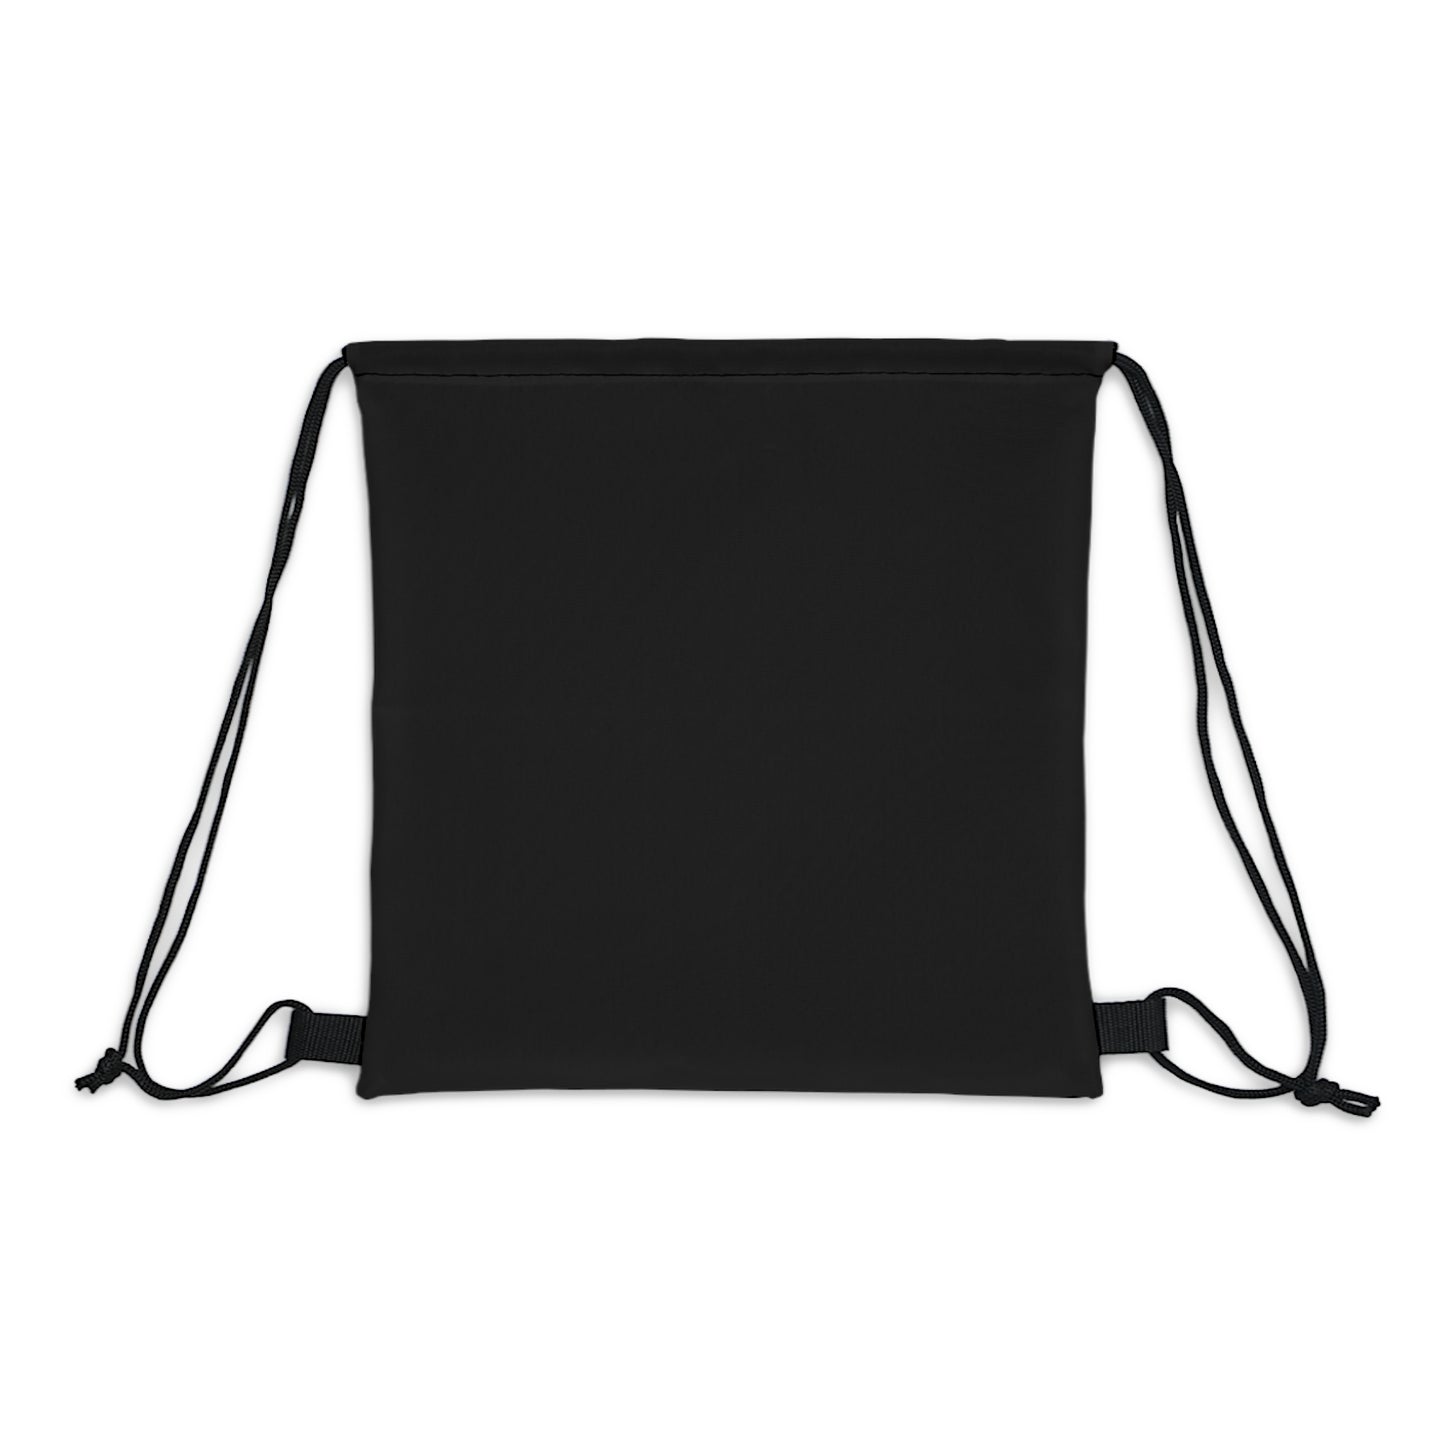 Spring In The Air - Outdoor Drawstring Bag